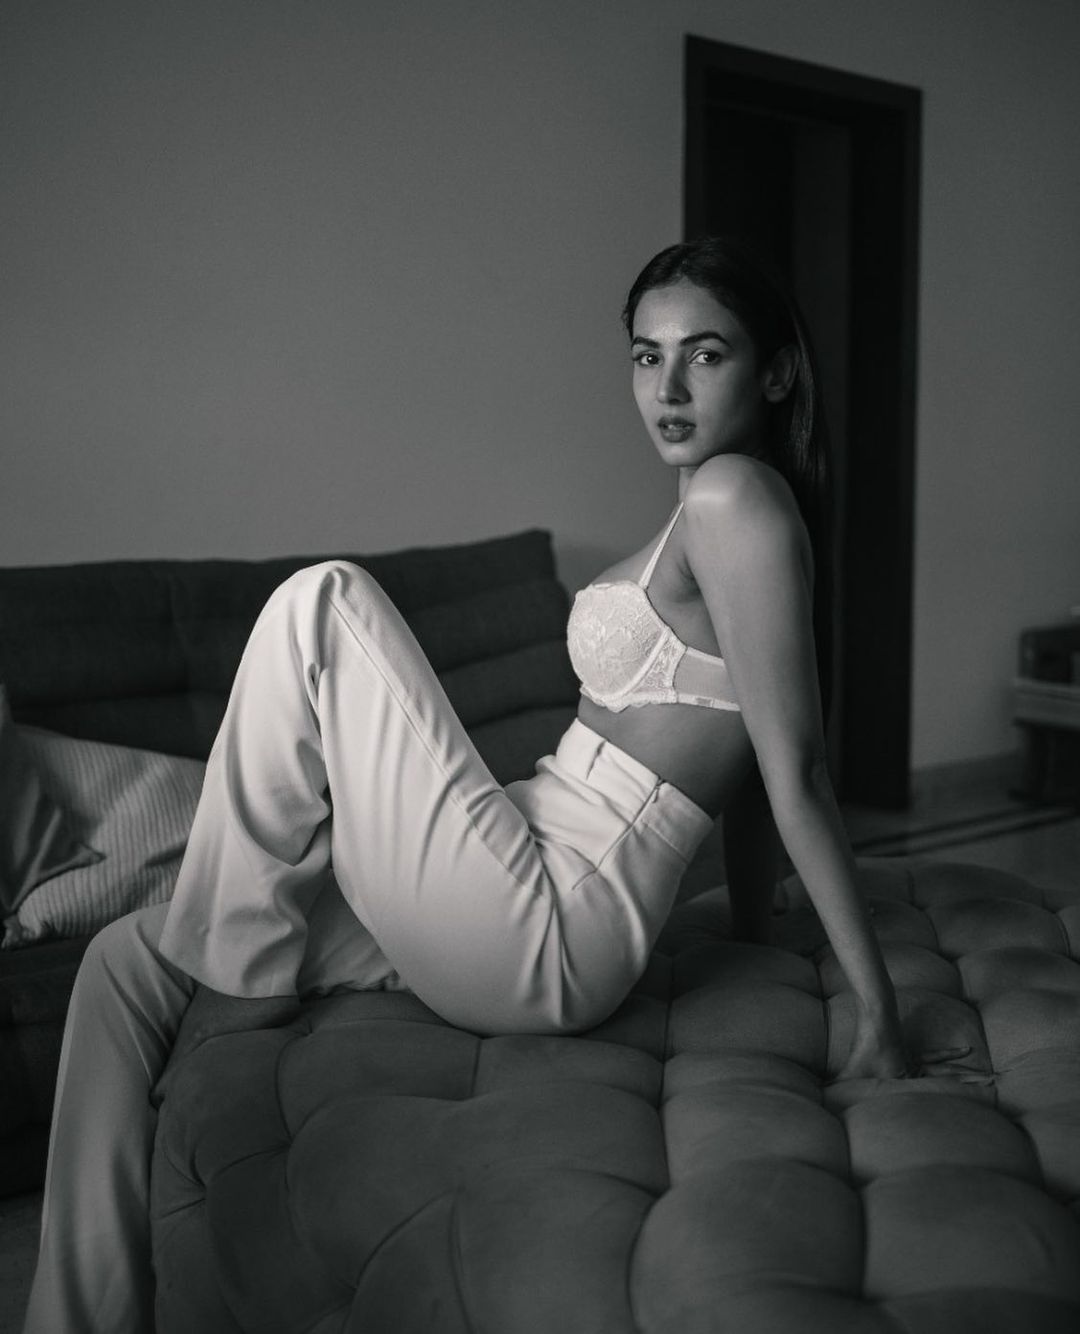 Sonal Chauhan looks hot in her brassiere in a black-and-white photo